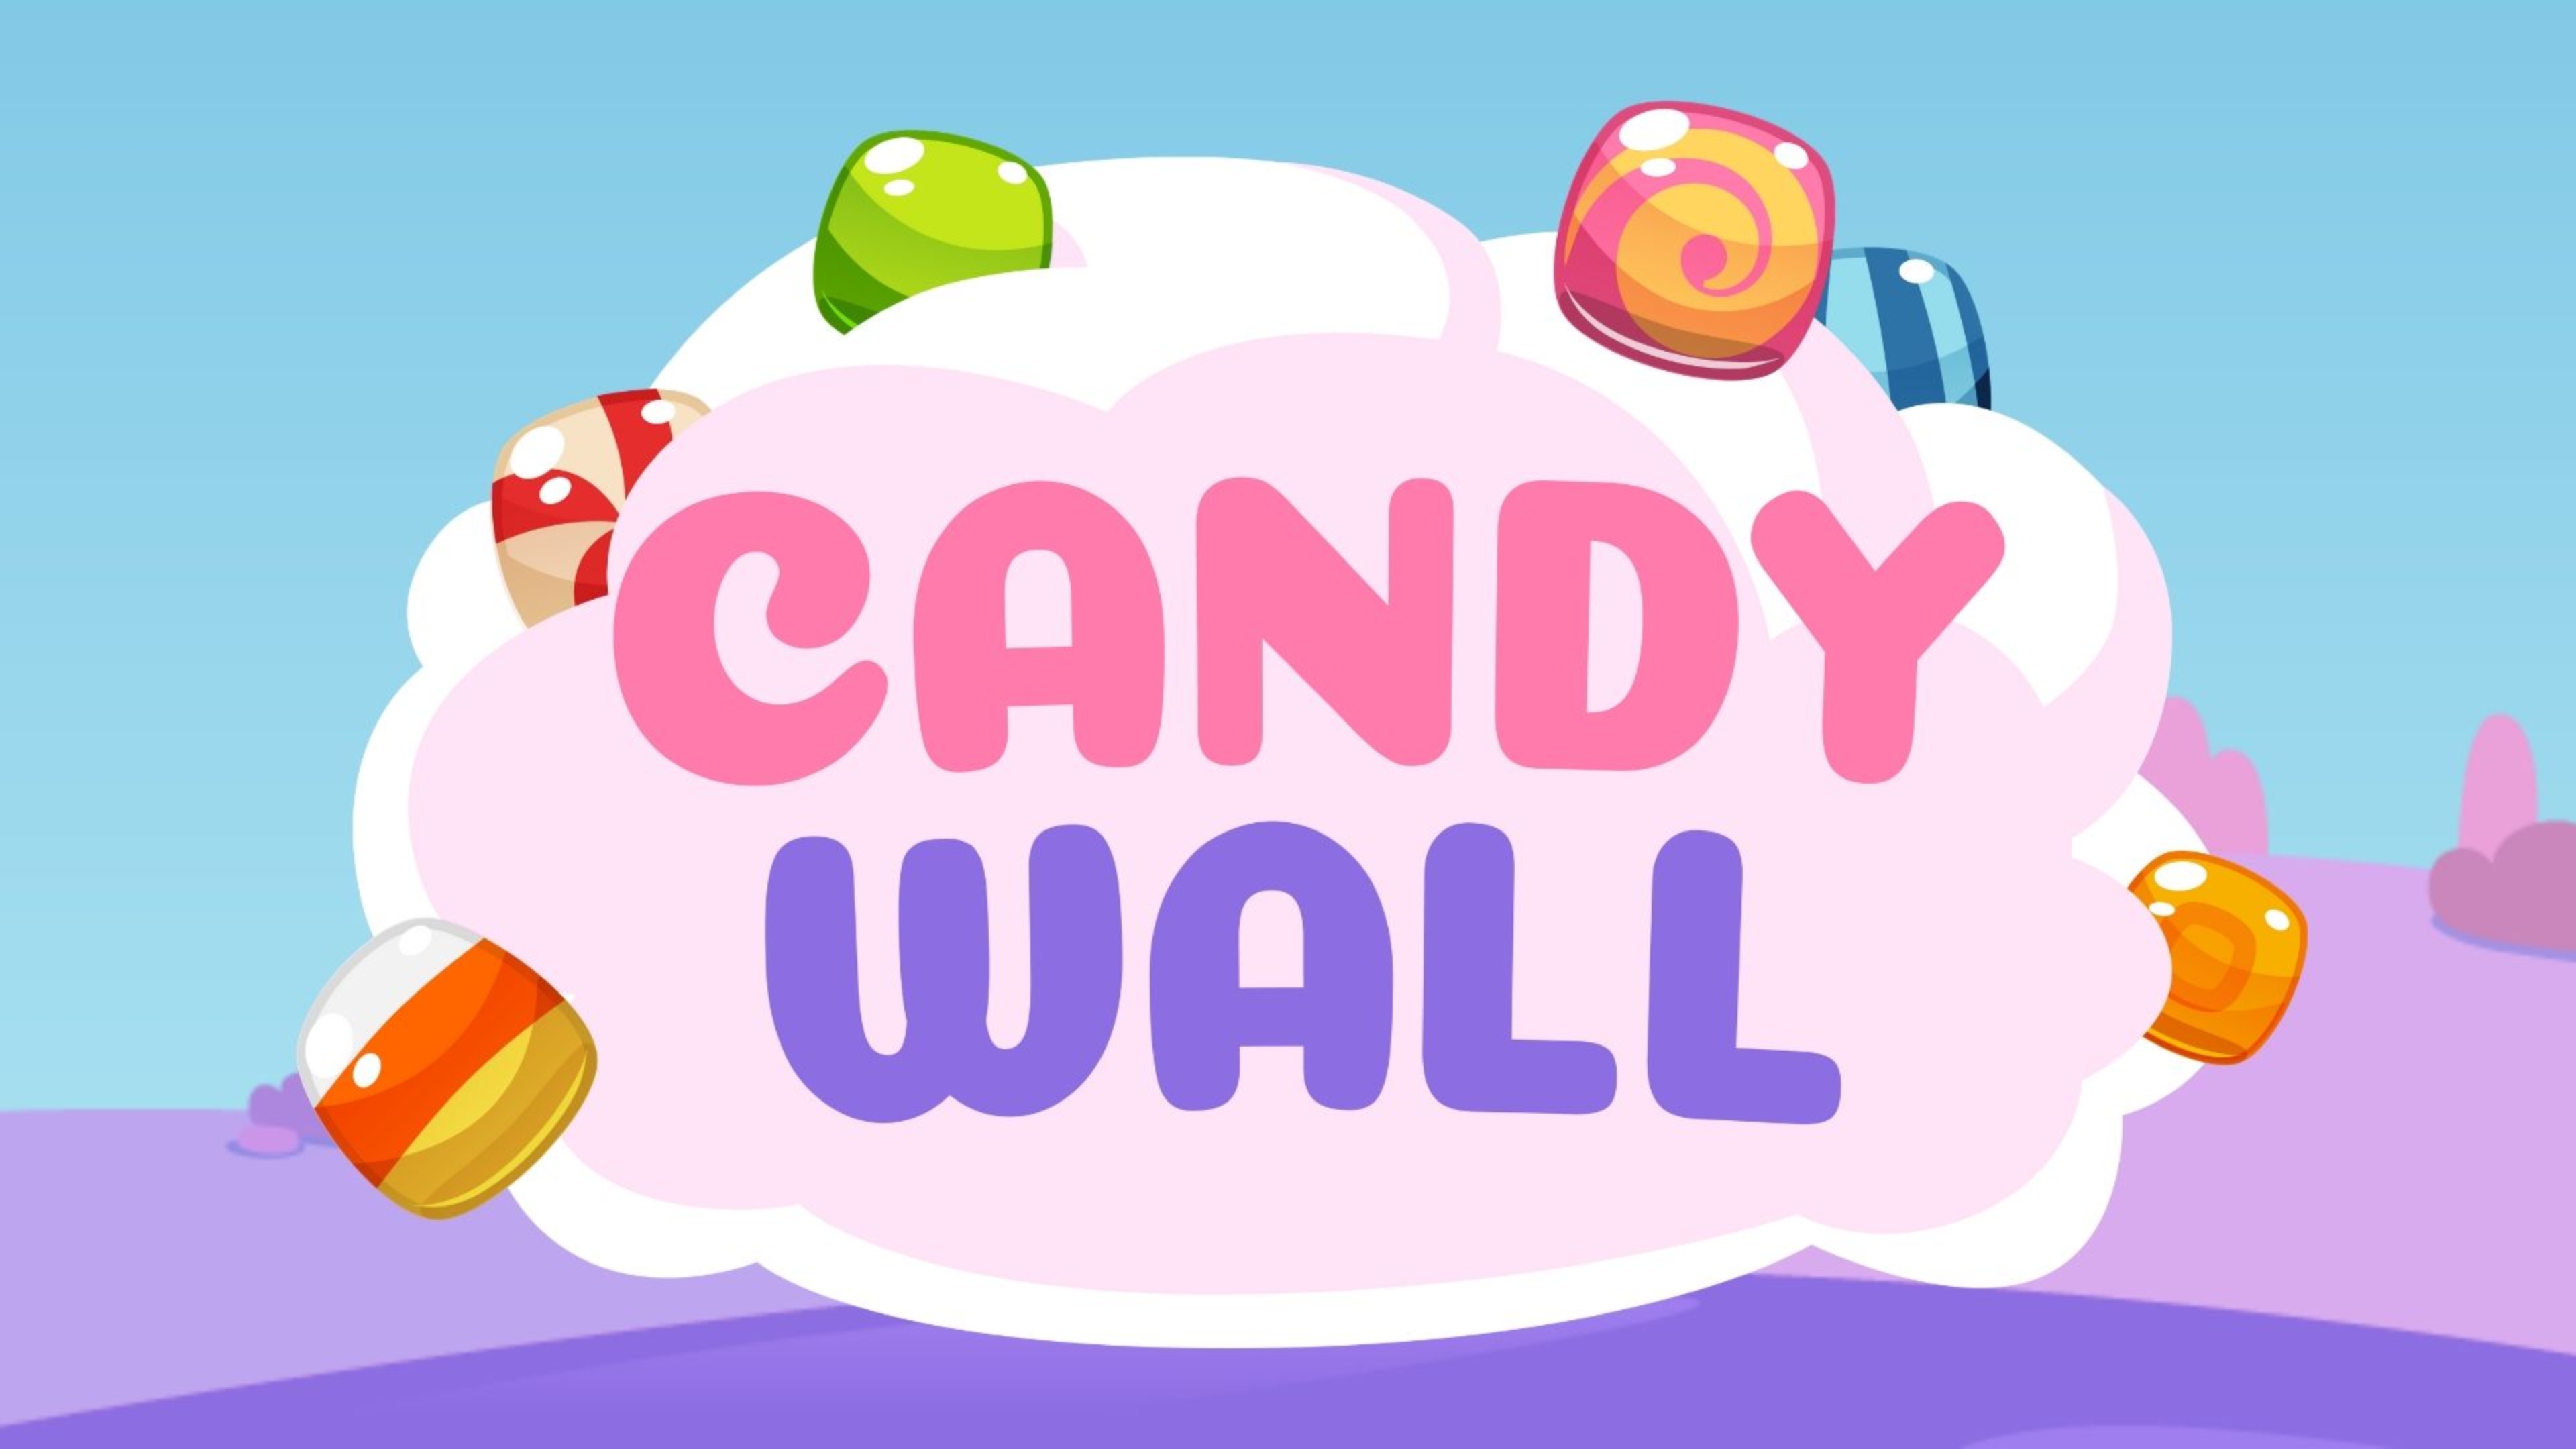 Candy Wall demo